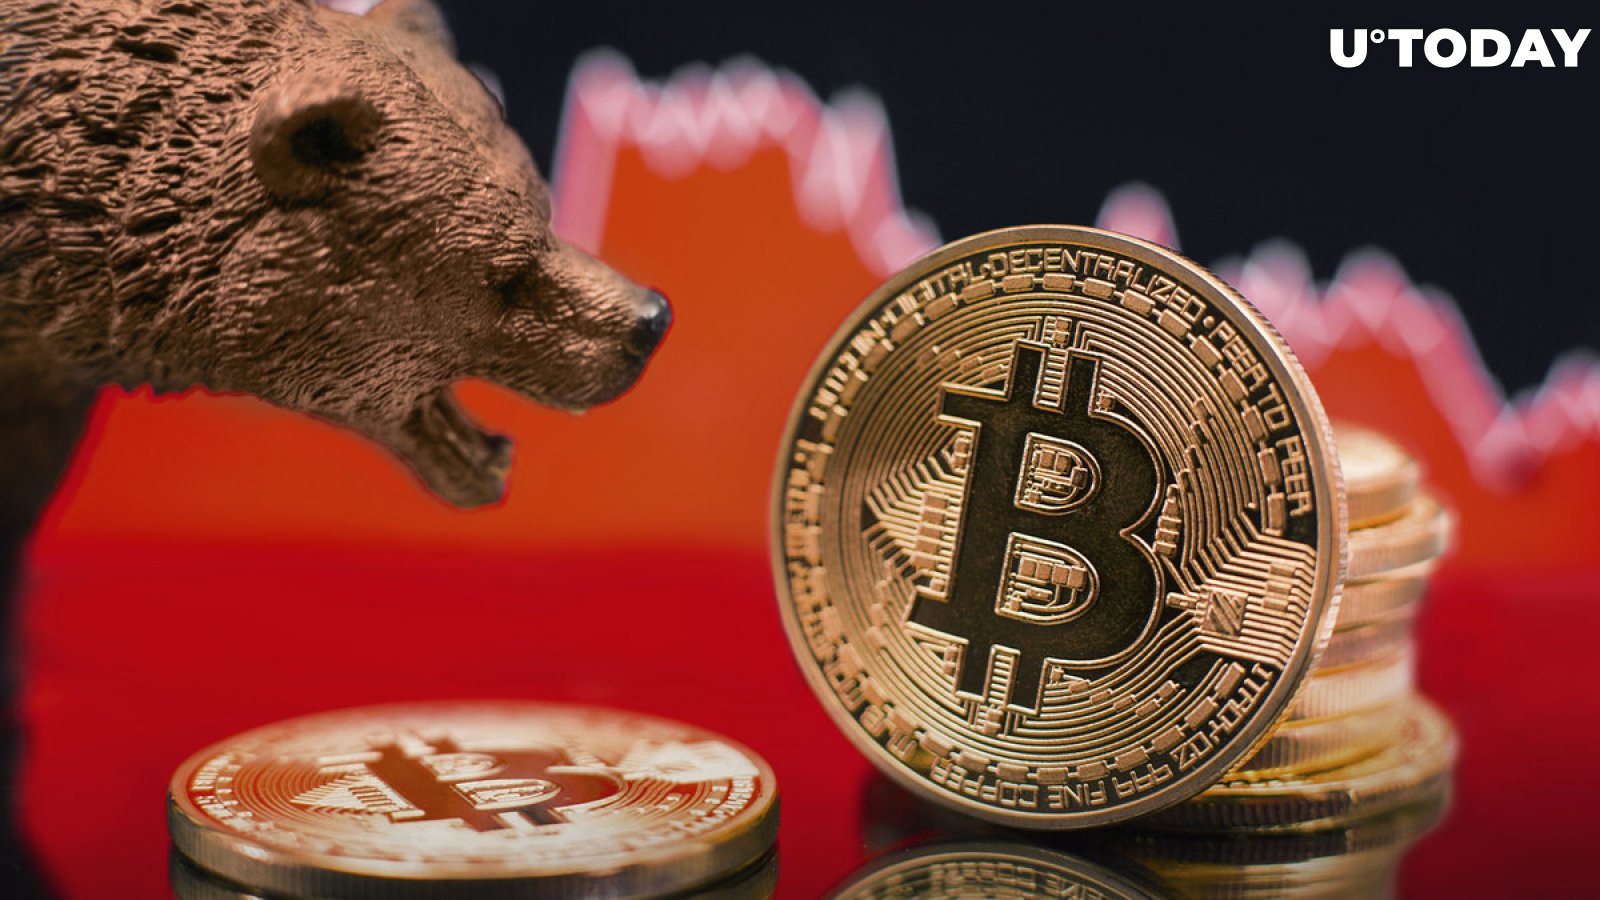 $100 Million in Bitcoin (BTC) Positions Liquidated in Most Painful Session for Bears in Months